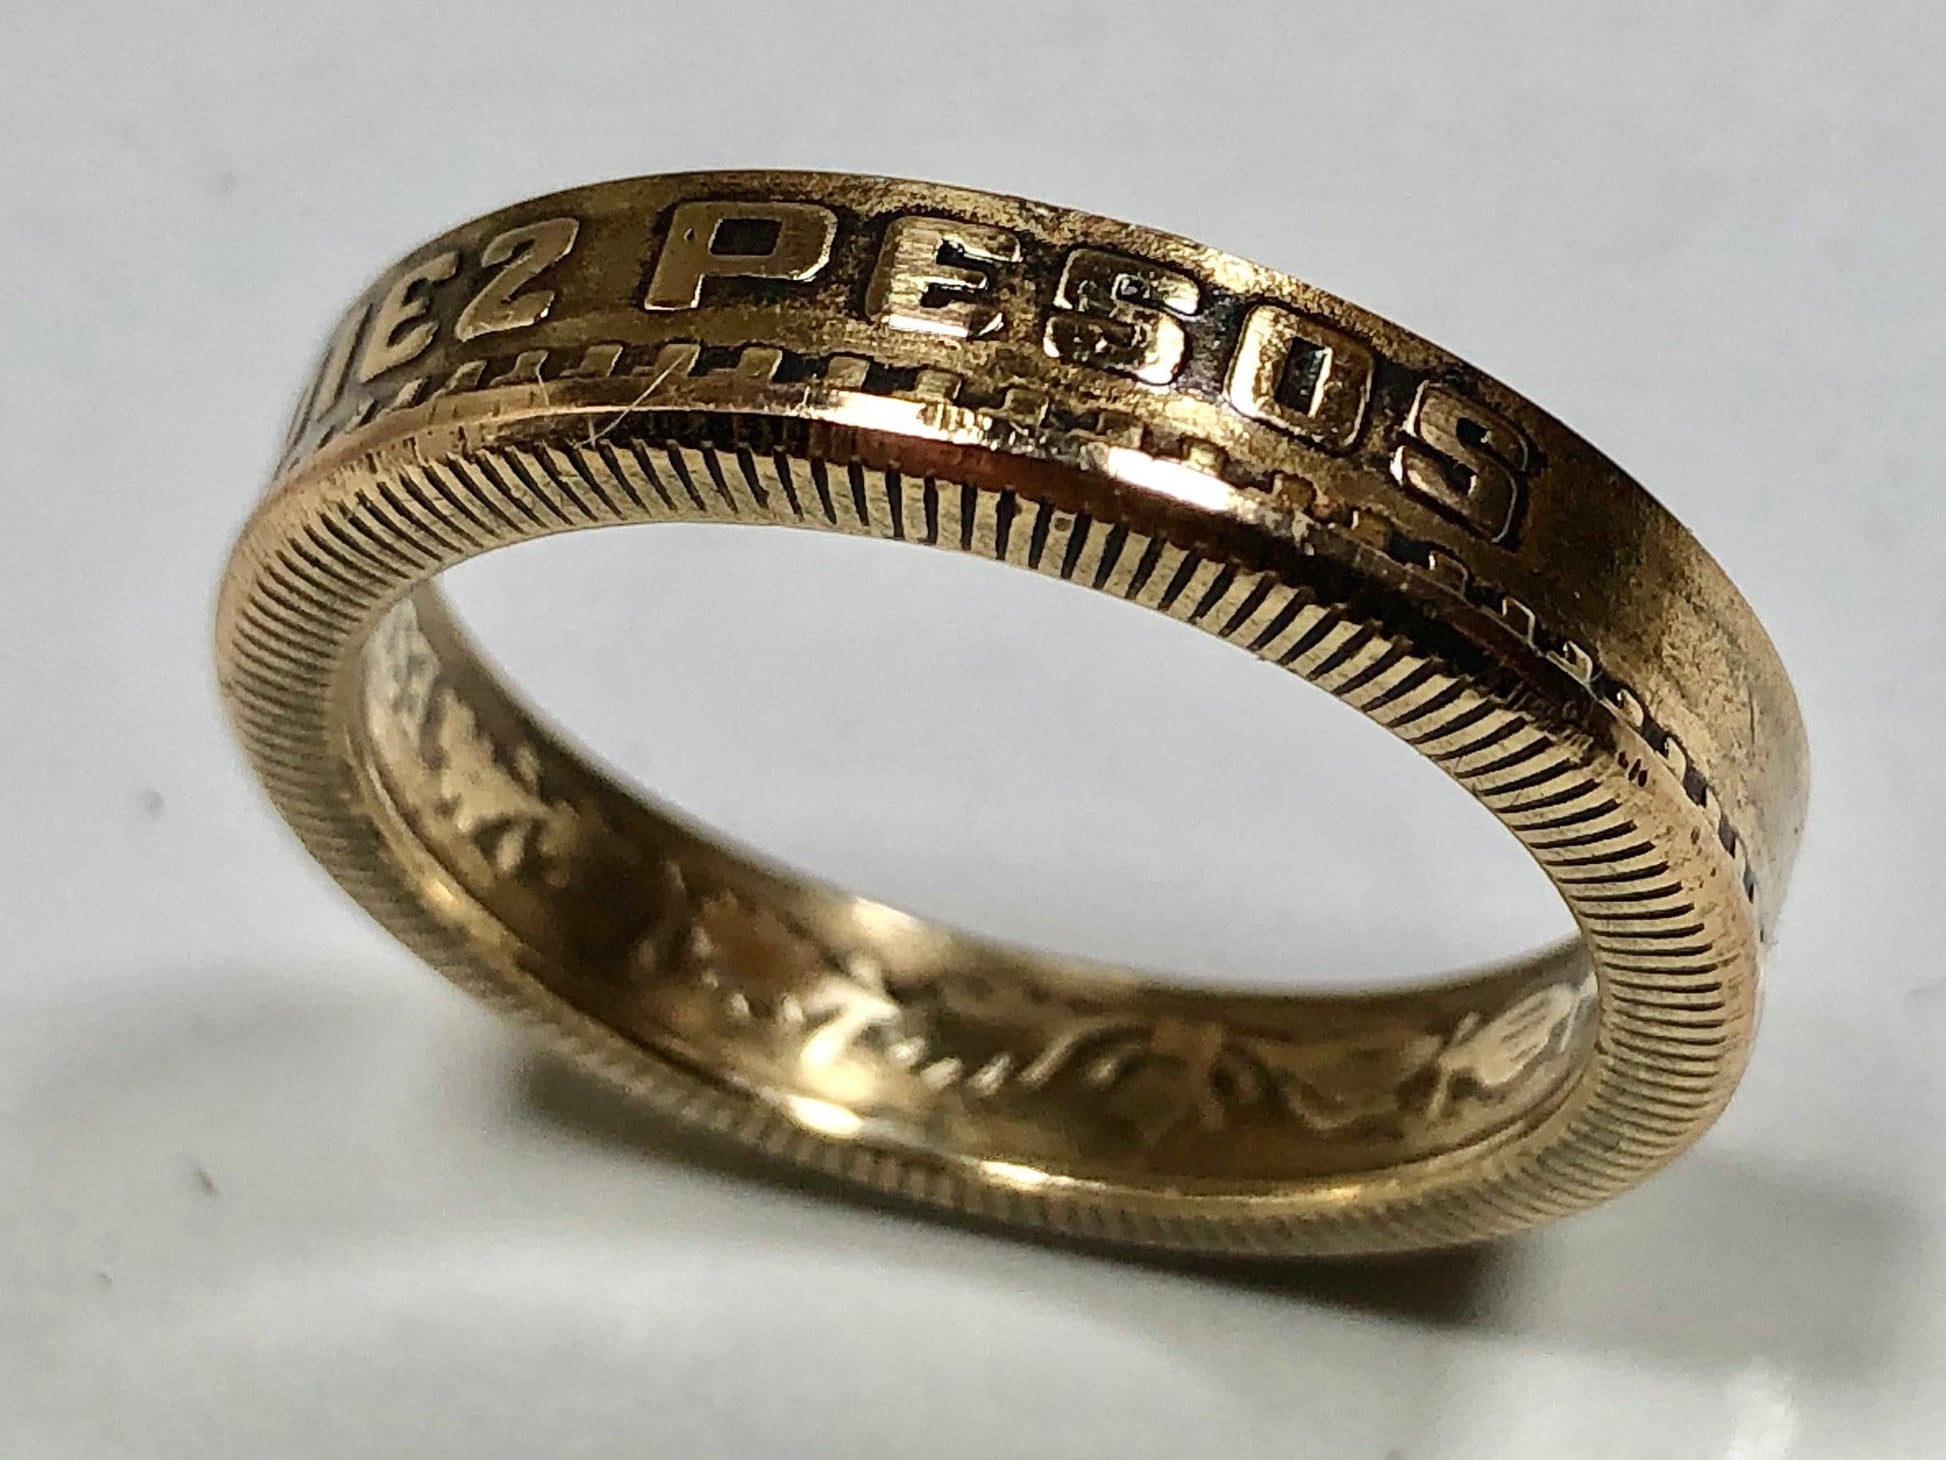 Vintage Mexico Ring Mexican 10 Peso Coin Ring Handmade Personal Jewelry Ring Gift For Friend Coin Ring Gift For Him Her World Coin Collector